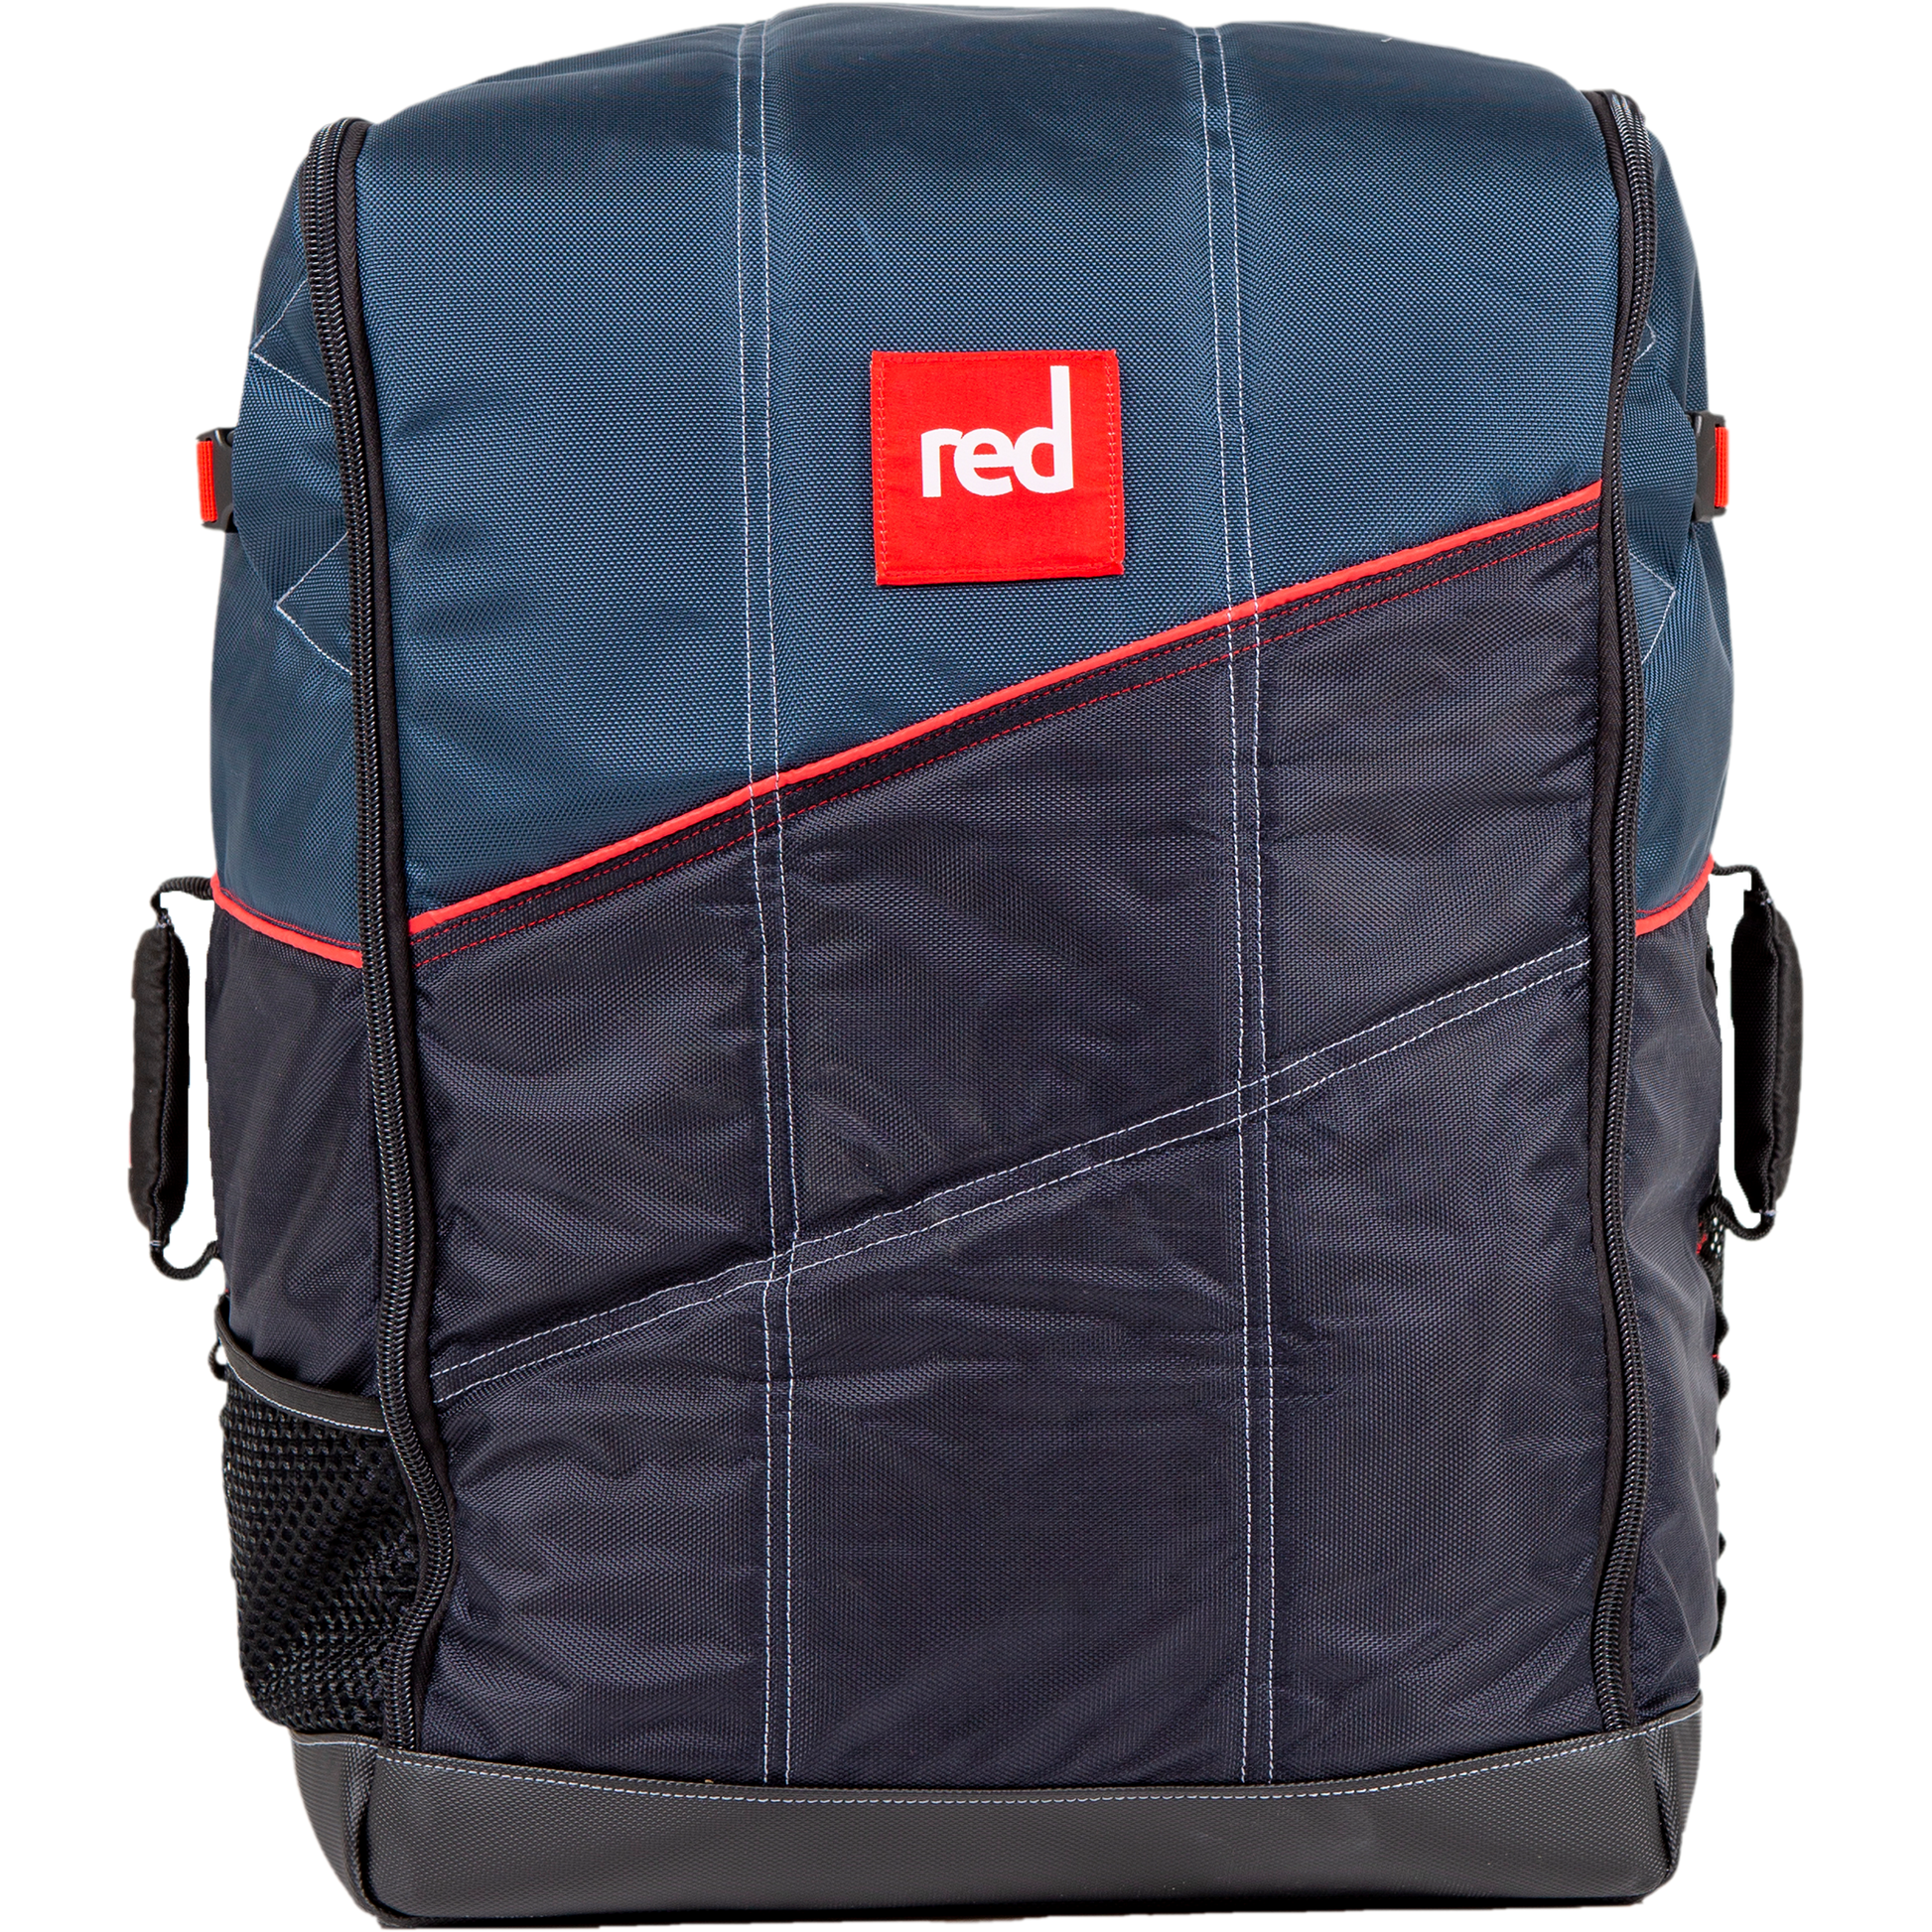 2022 Red Paddle Co 12'0" Compact Board Bag